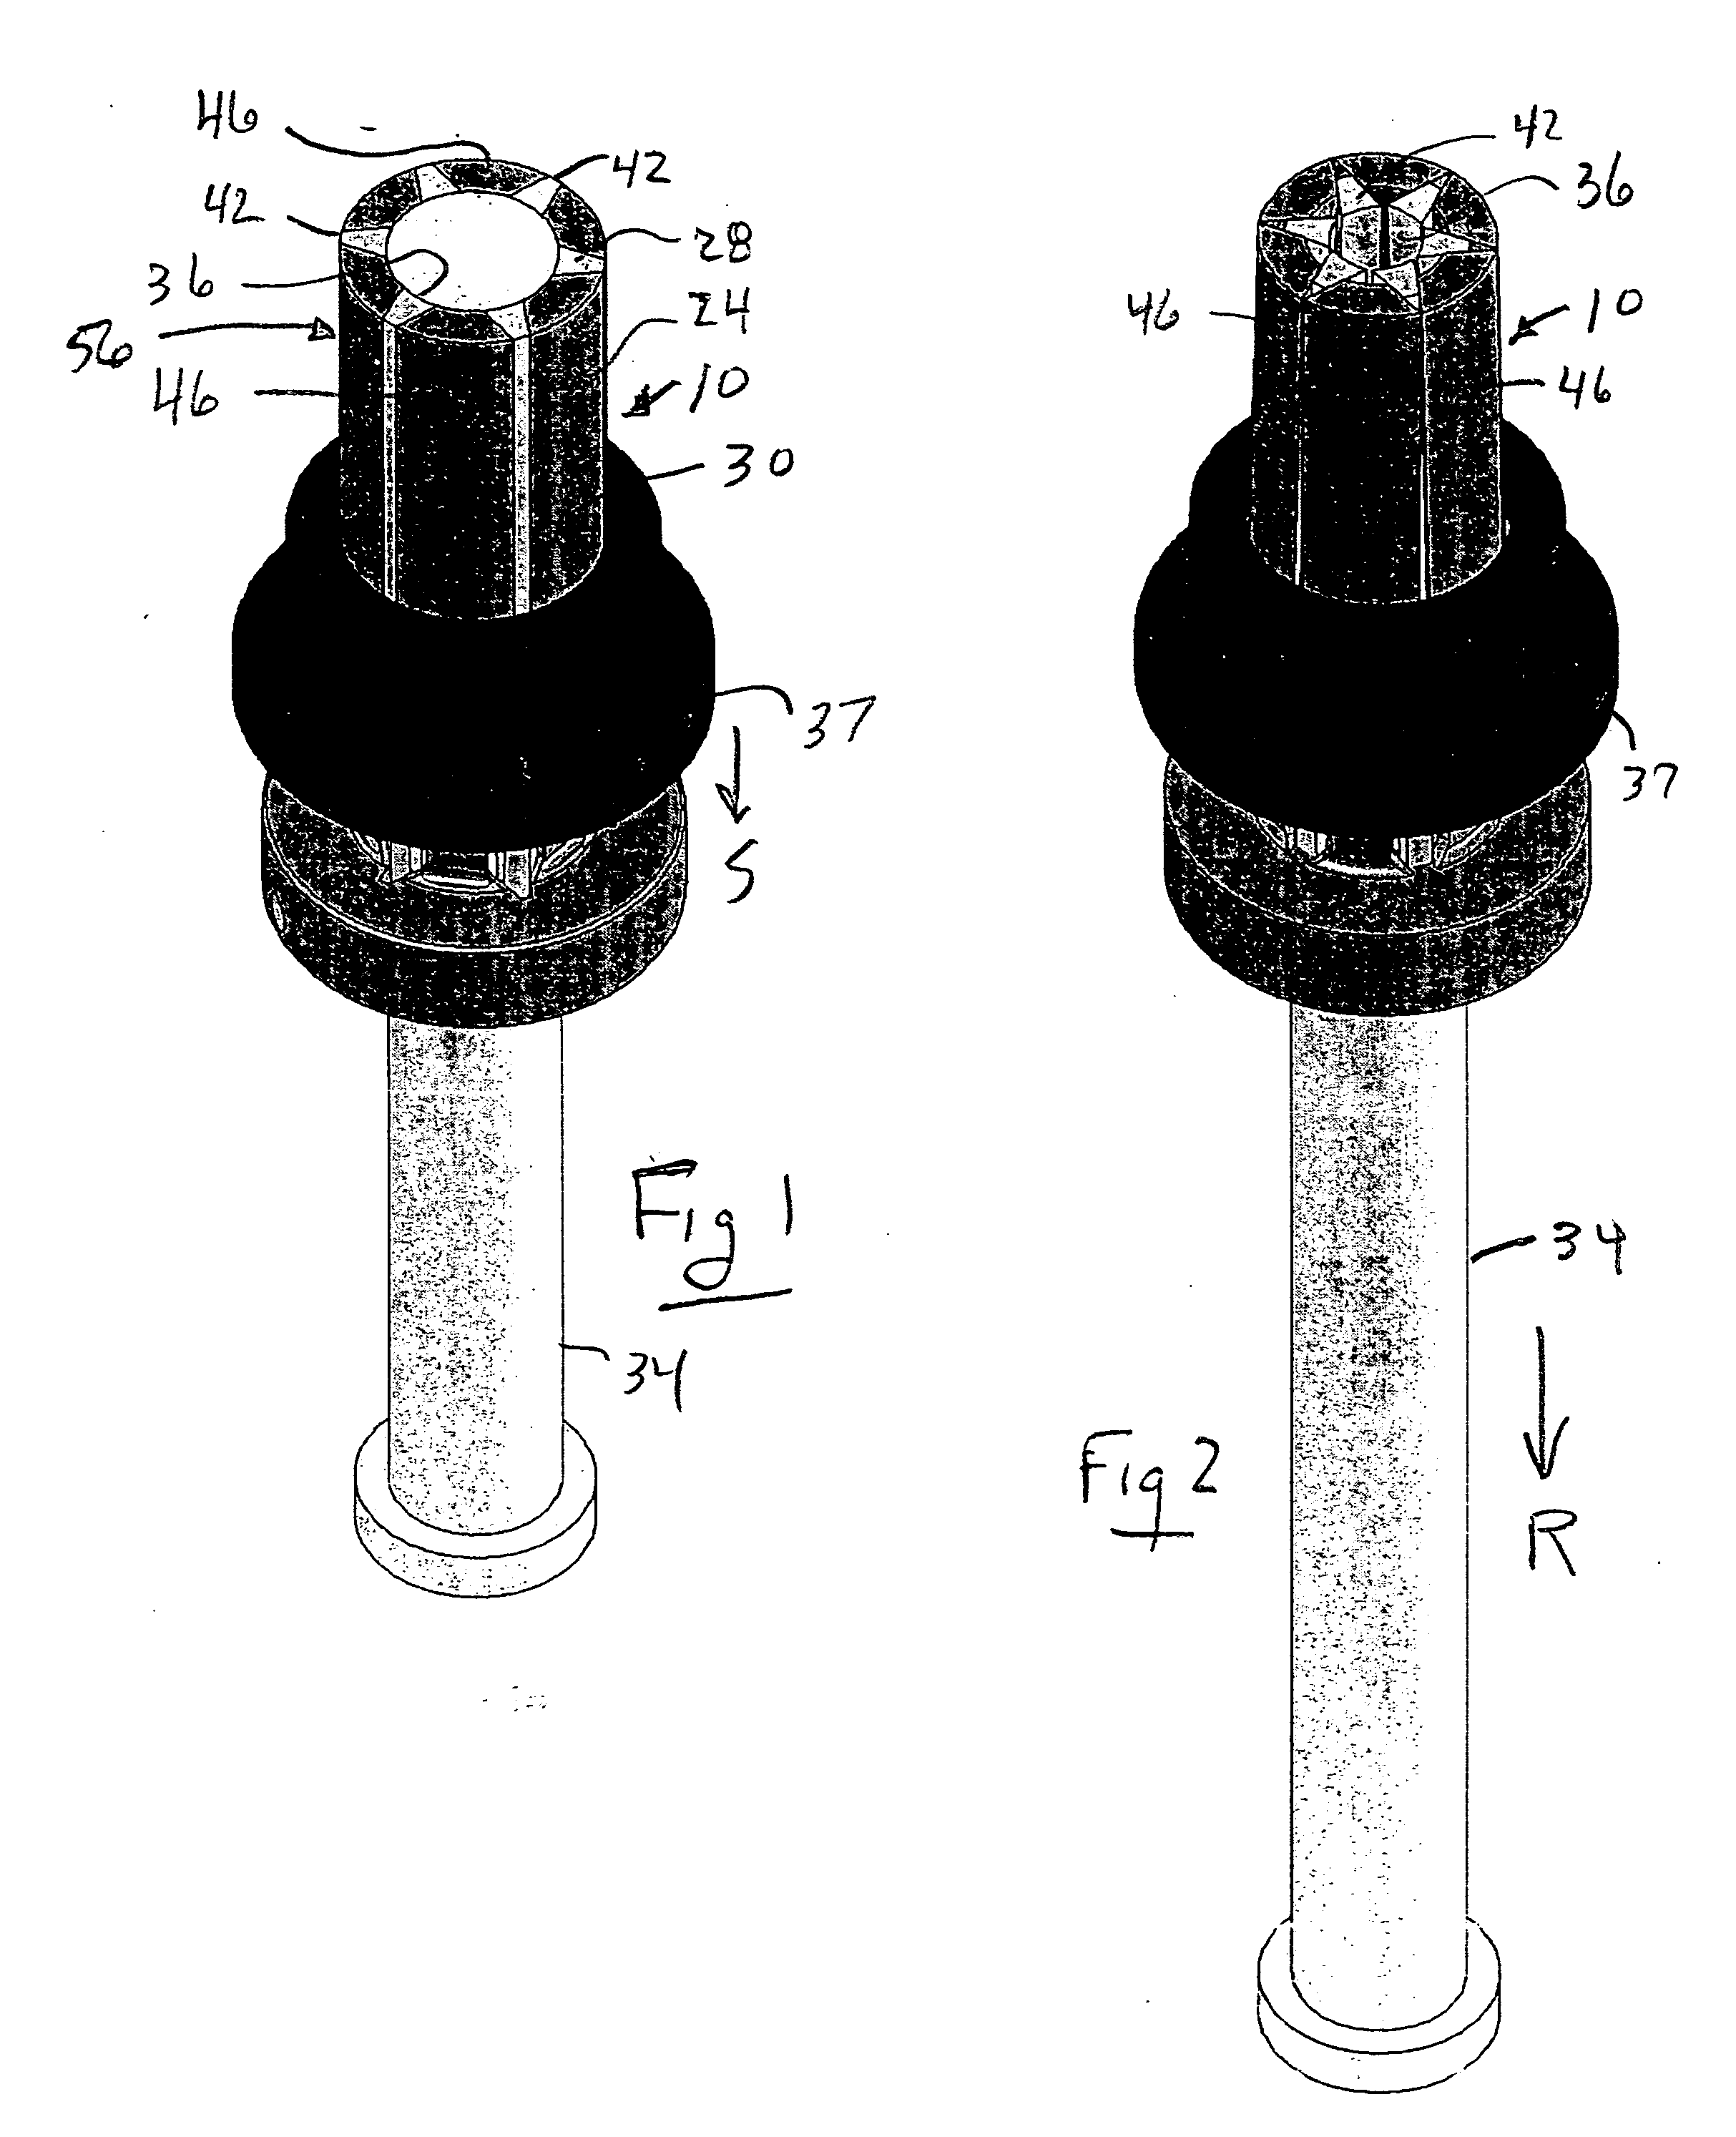 Collapsible core assembly for a molding apparatus